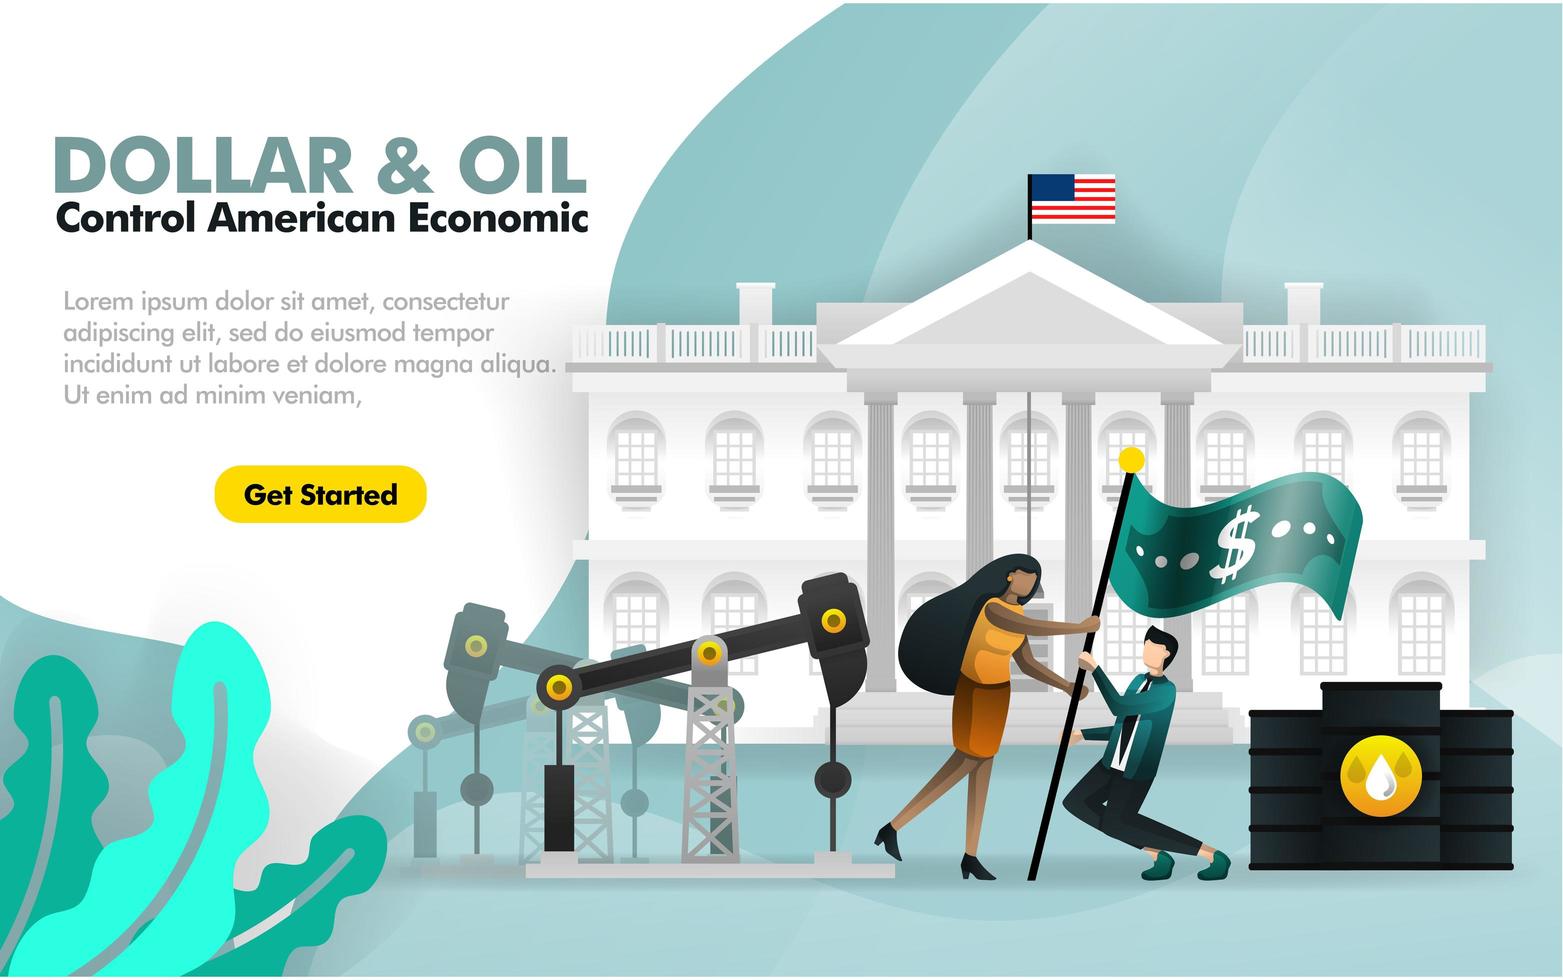 Dollar and oil control American economy. with white house background and two people flying dollar flag surrounded by oil refinery. can use for, landing page, template, web, mobile app, poster, banner vector